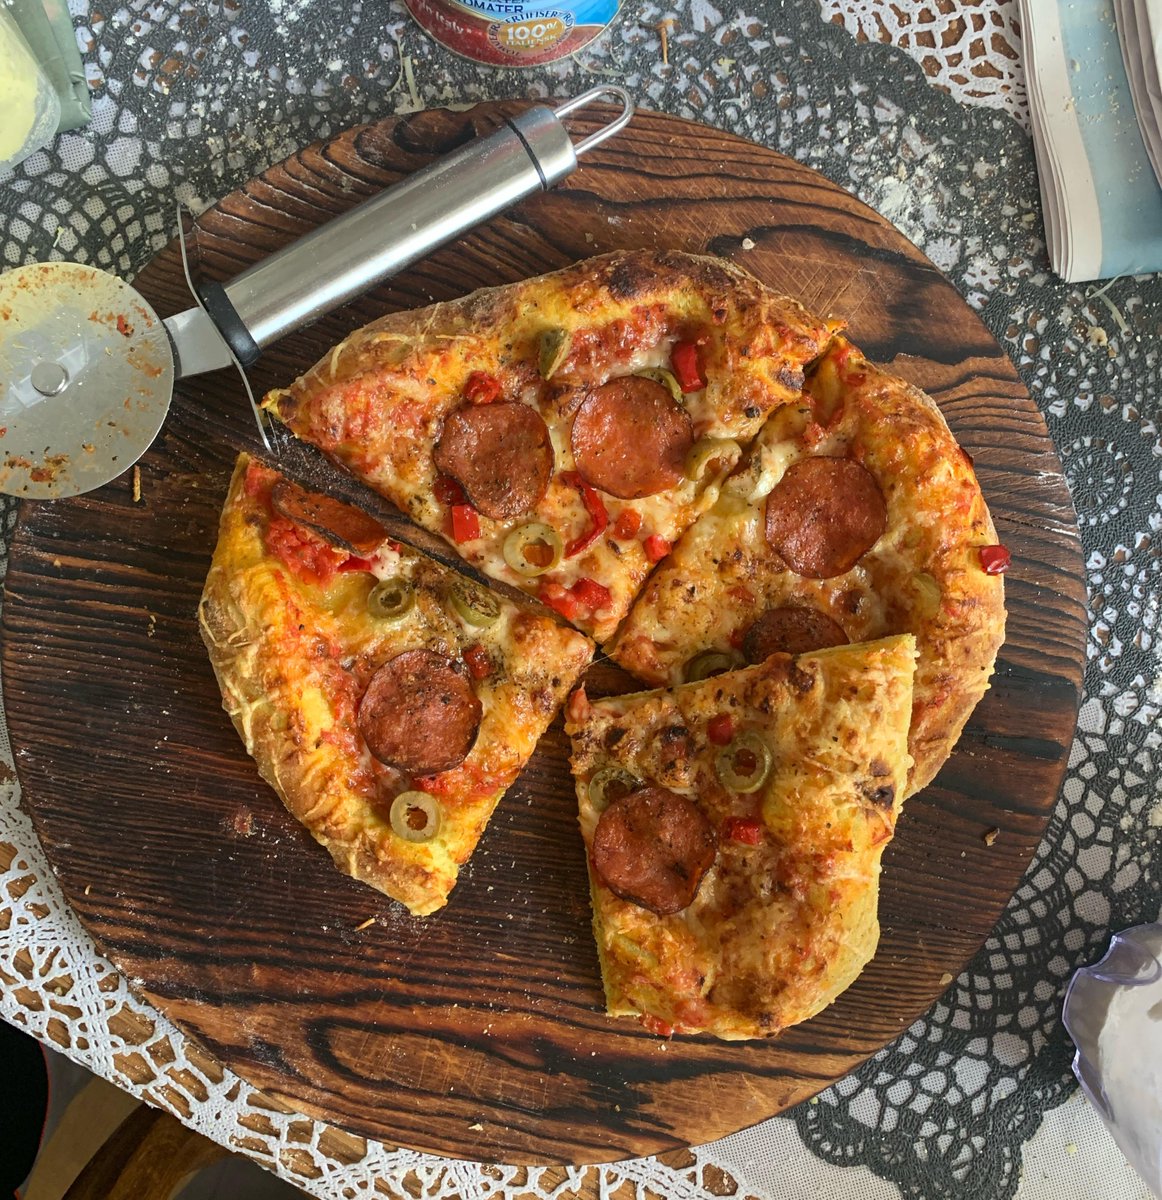 Pepperoni, bell pepper, olive, tomato sauce, with dough having a little curry/curcuma on ferment to give Color, on pizza steel (Via: redd.it/vrtn5g)